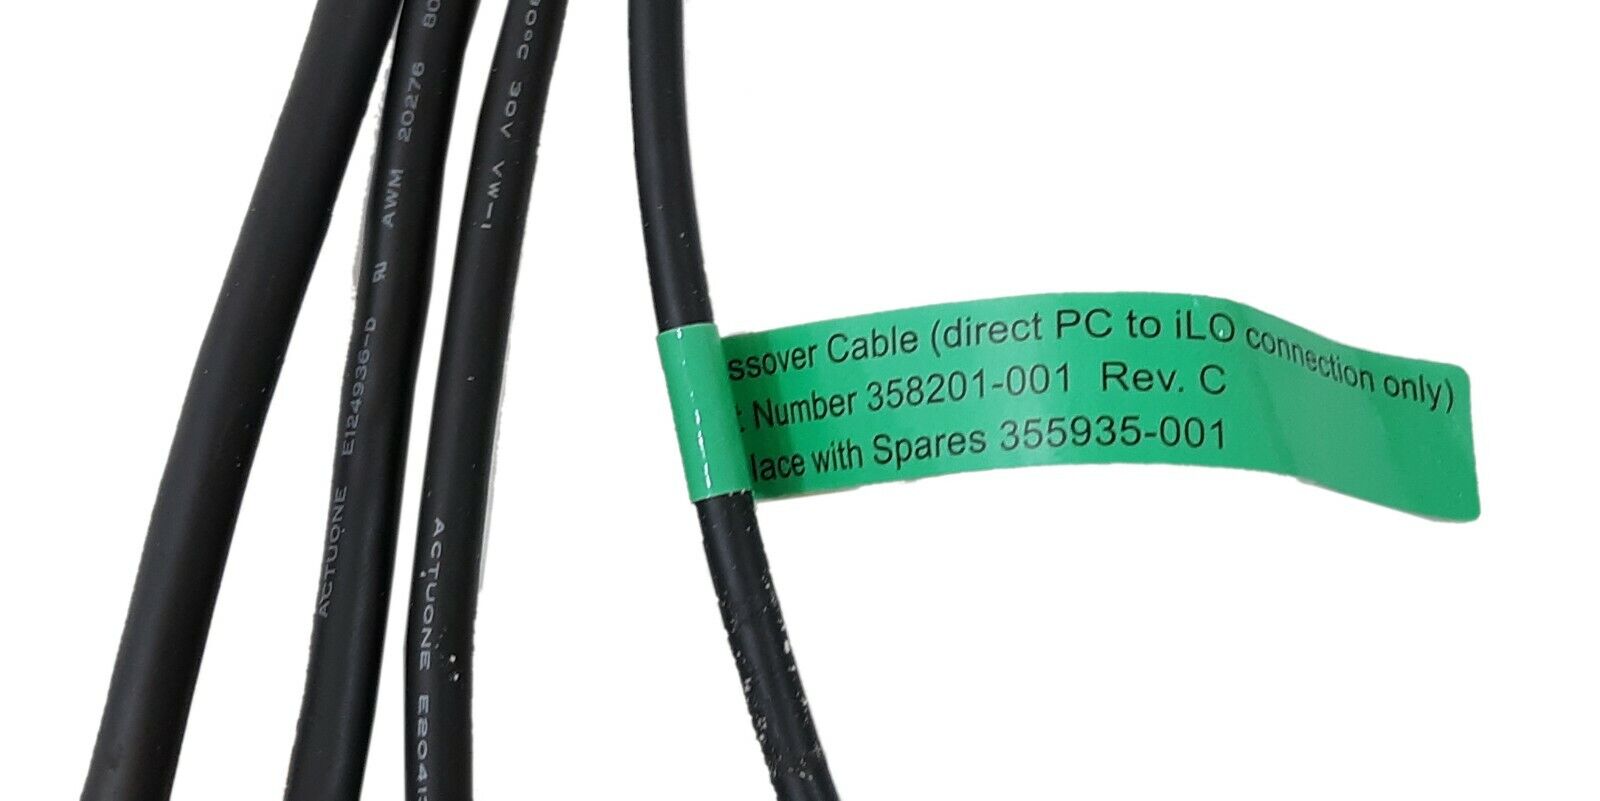 HP Crossover Cable for Proliant Server Direct PC to iLO 358201-001 355935-001